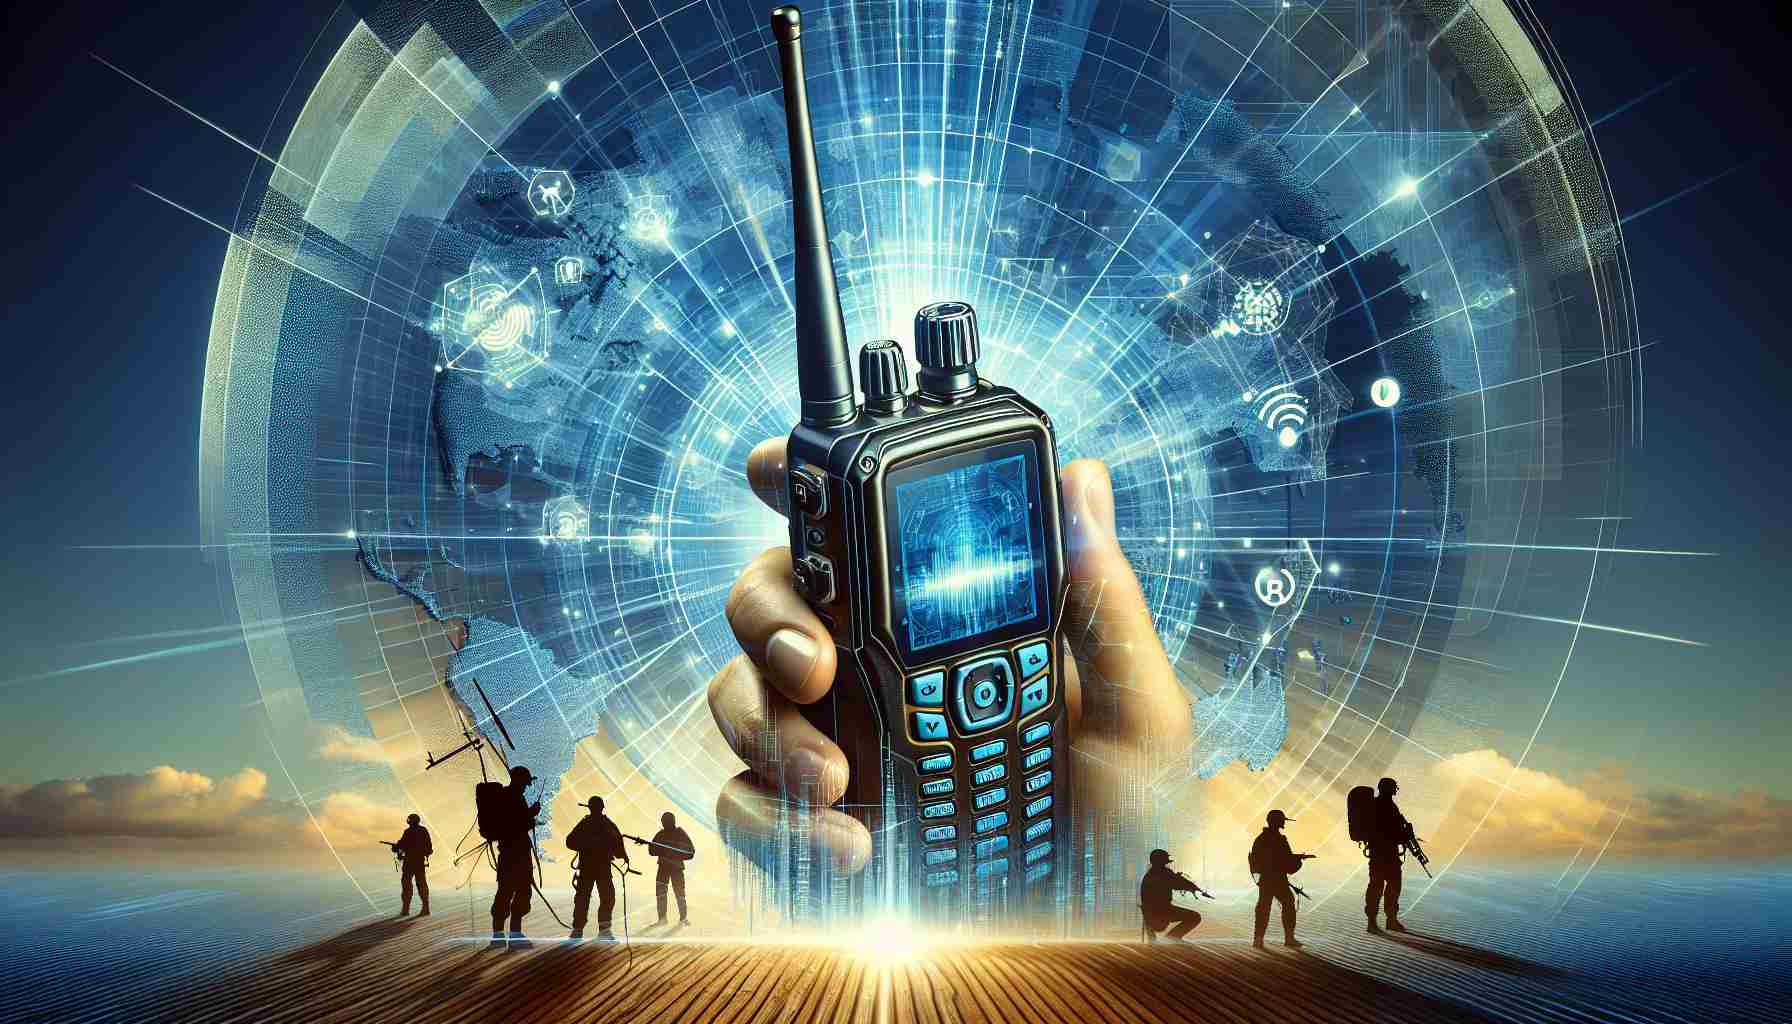 Moving Towards Seamless Communication: Motorola Solutions Introduces Advanced Radio Tech for Responders